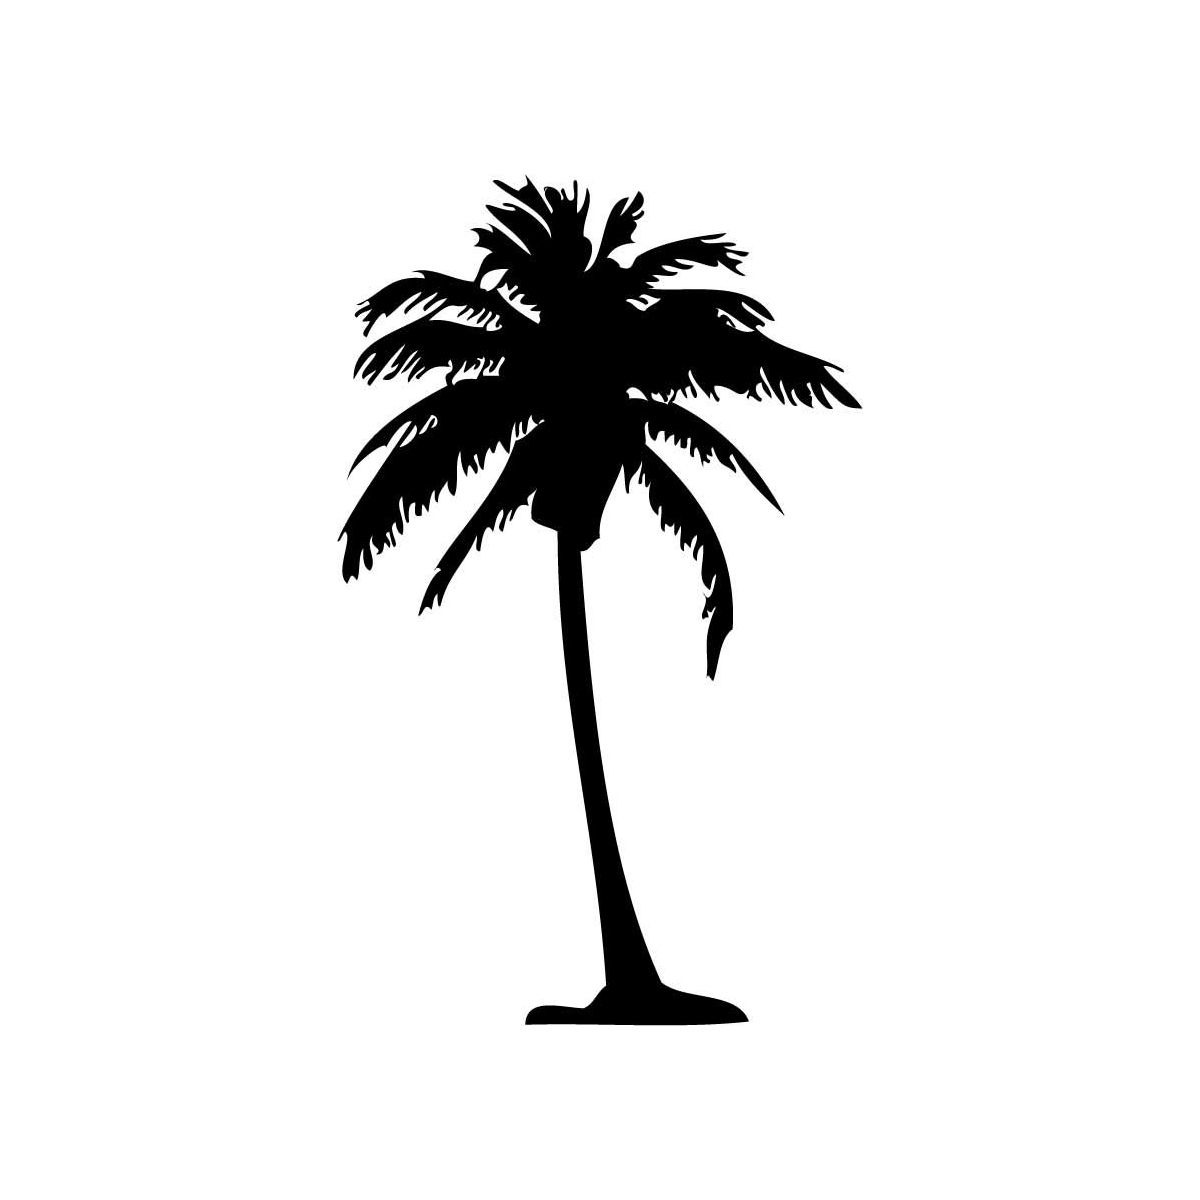 Clip Arts Related To : Arecaceae Silhouette Scalable Vector Graphics - Coco...